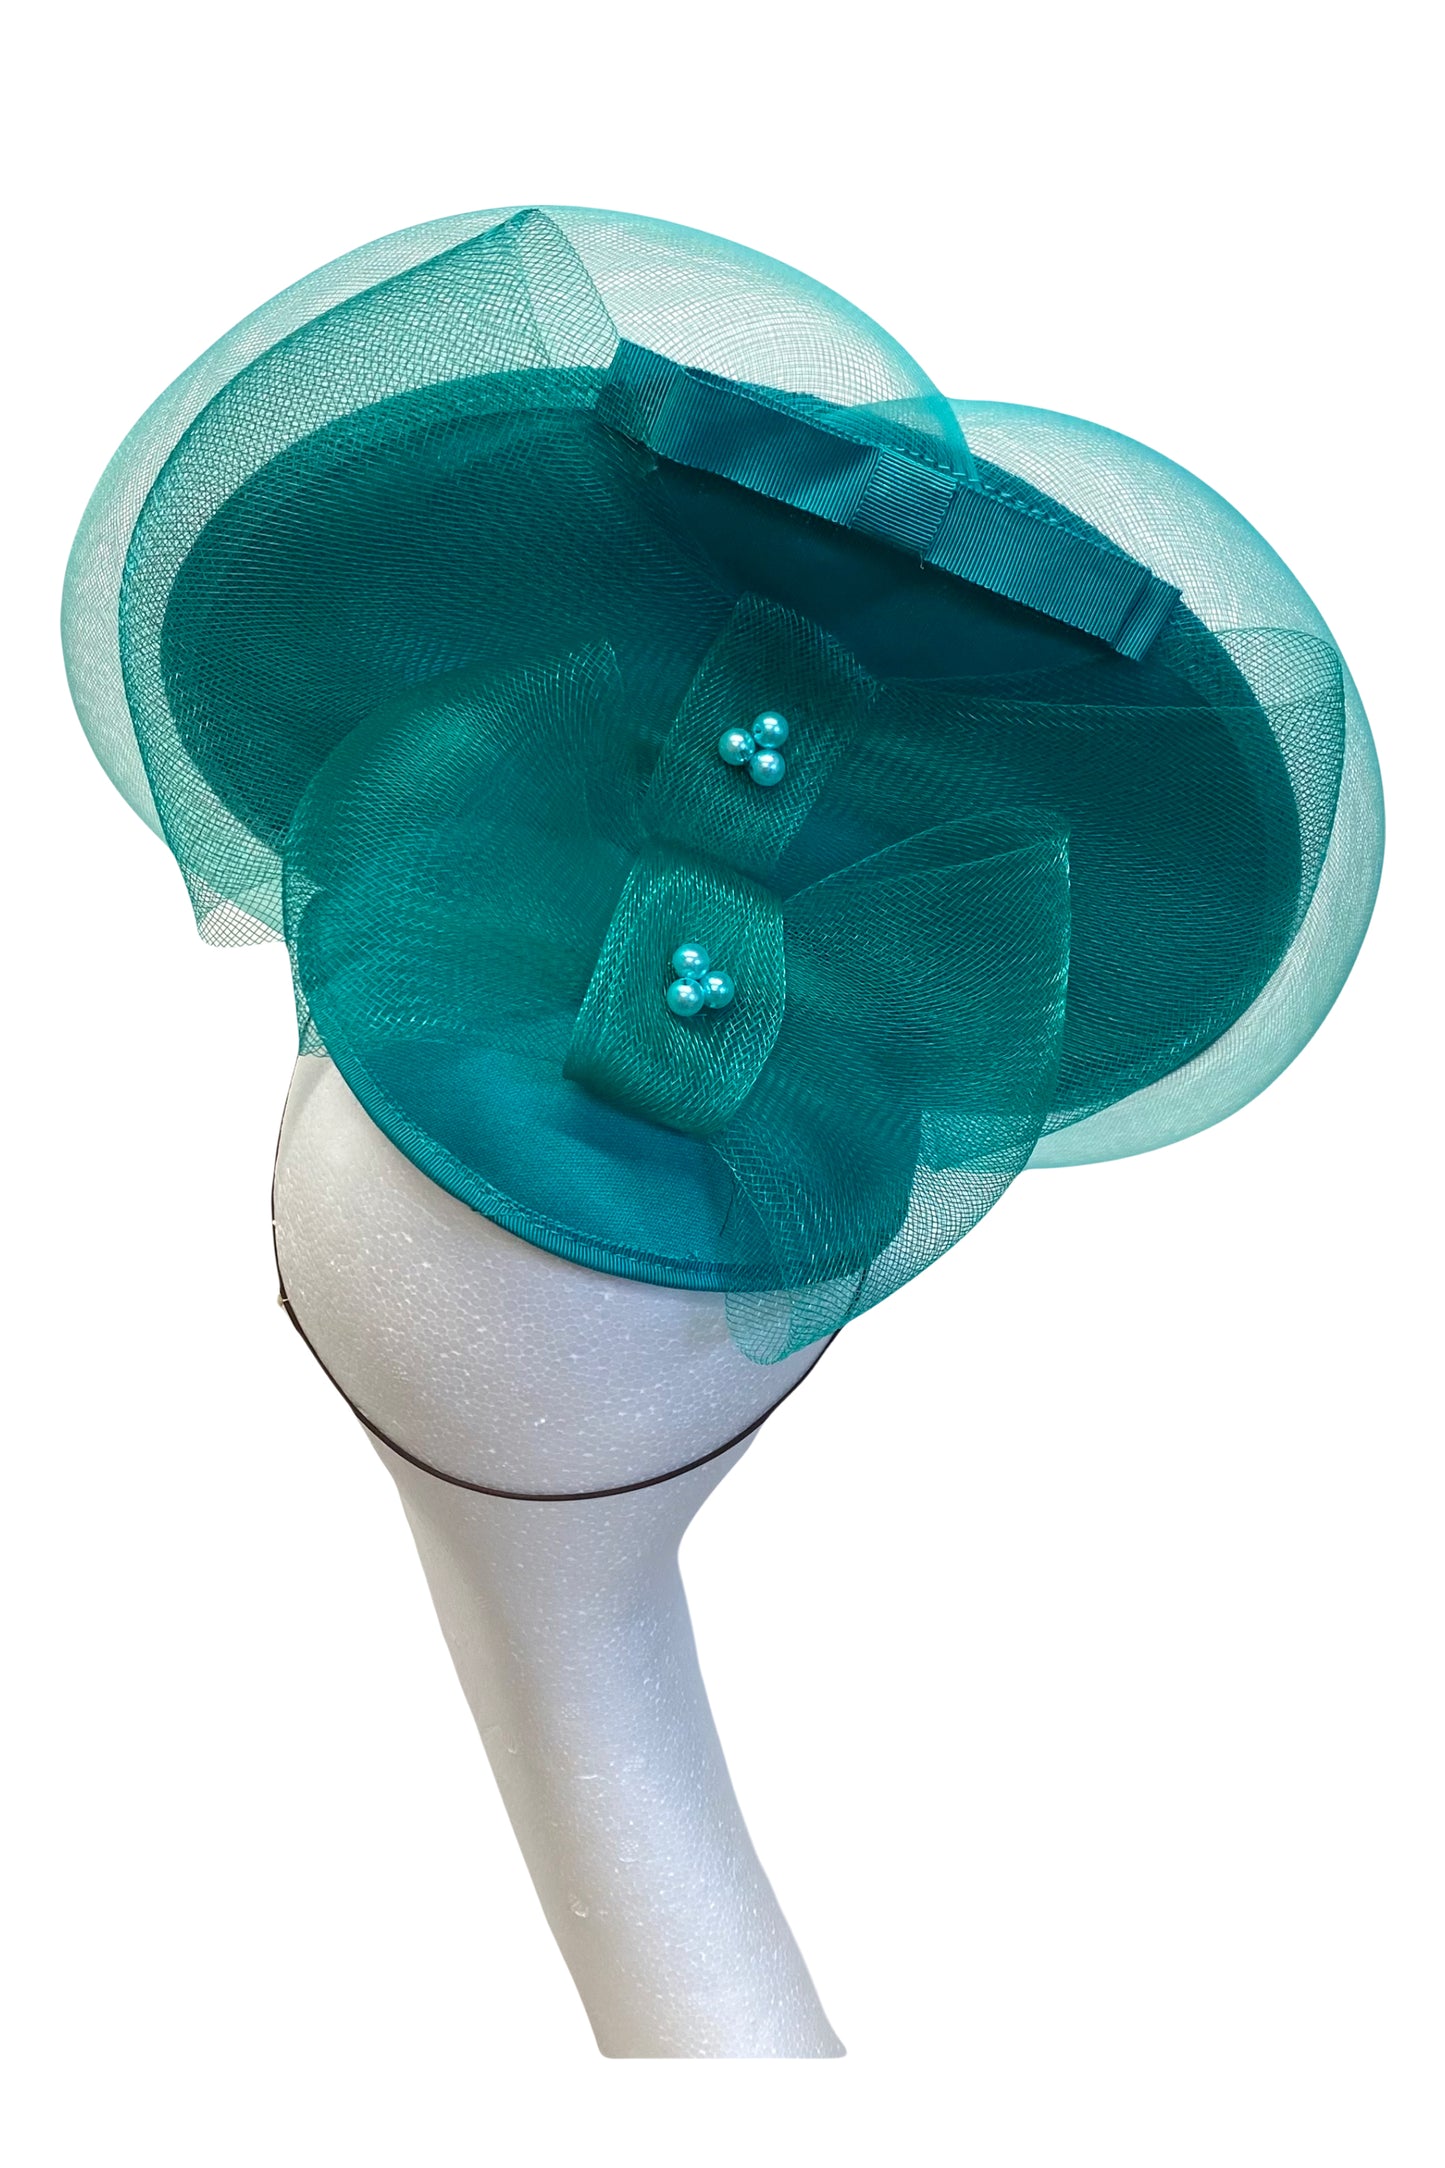 Teal green vintage headpiece for hire - sustainable fashion